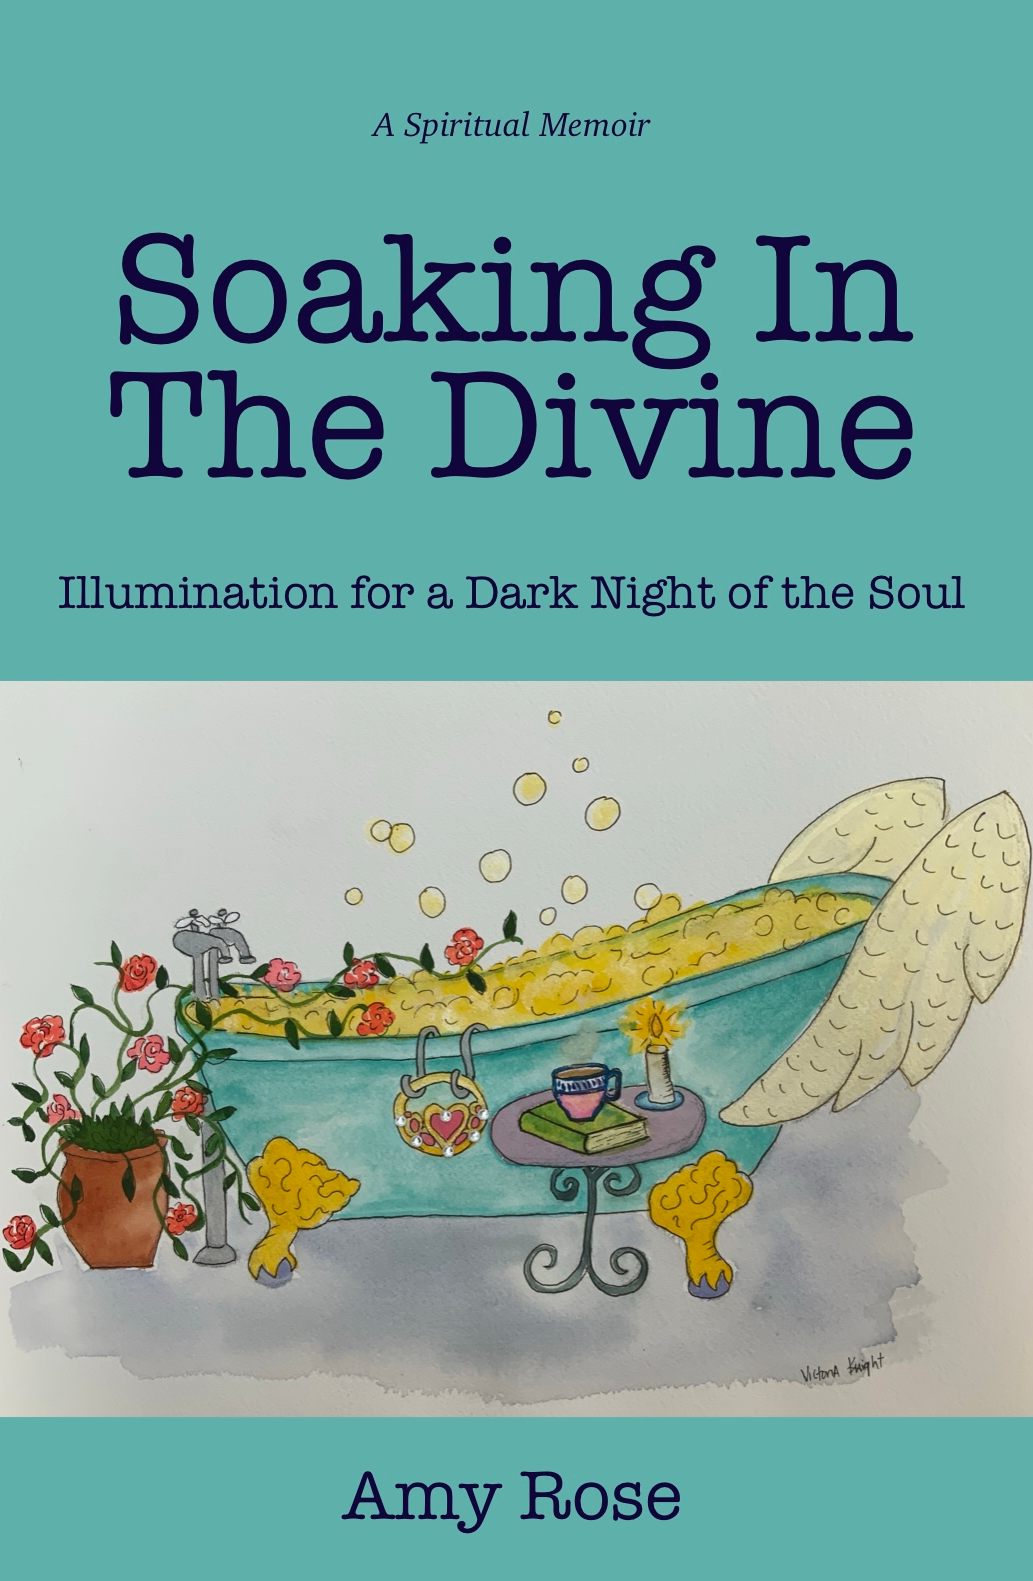 Soaking In the Divine. Illumination for a Dark Night of the Soul